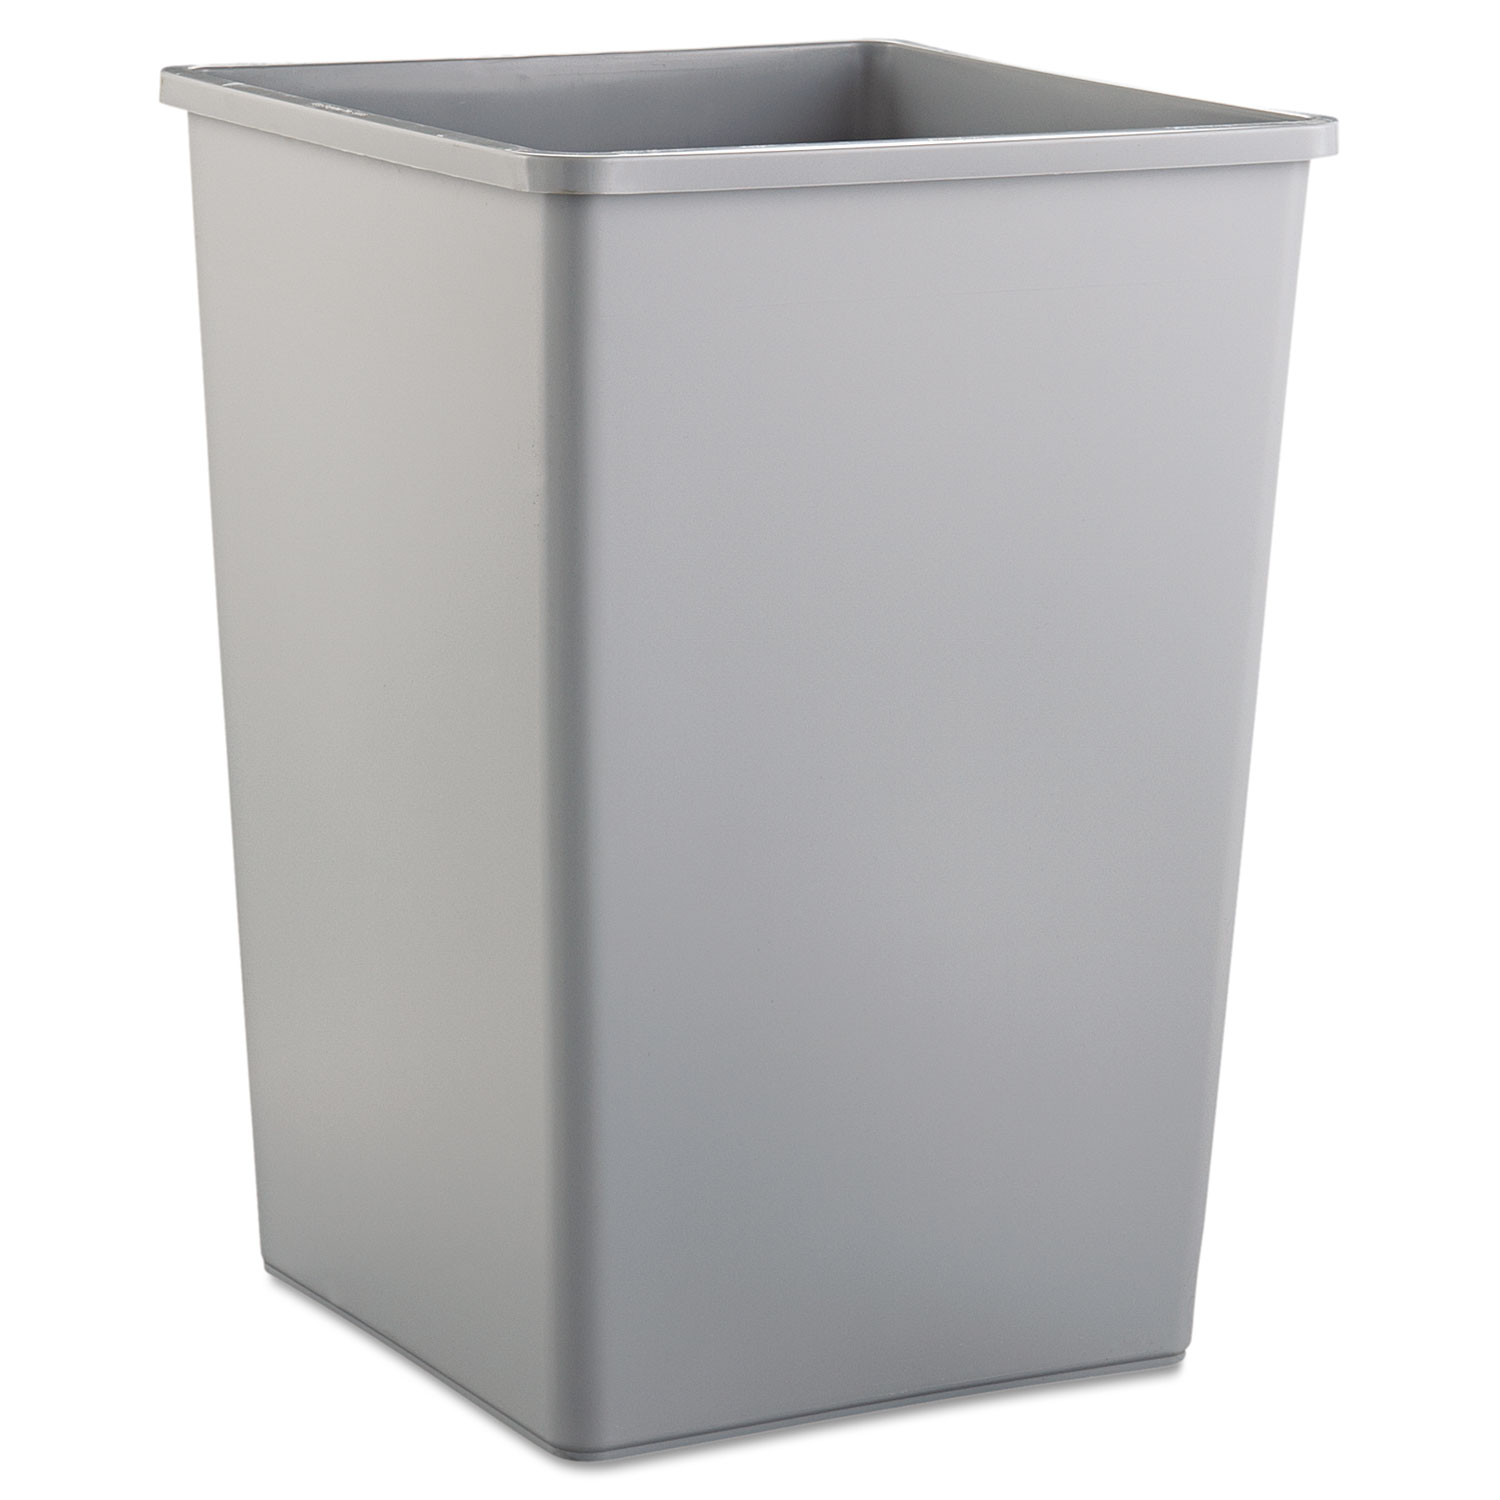 Untouchable Square Waste Receptacle, Plastic, 35 gal, Gray